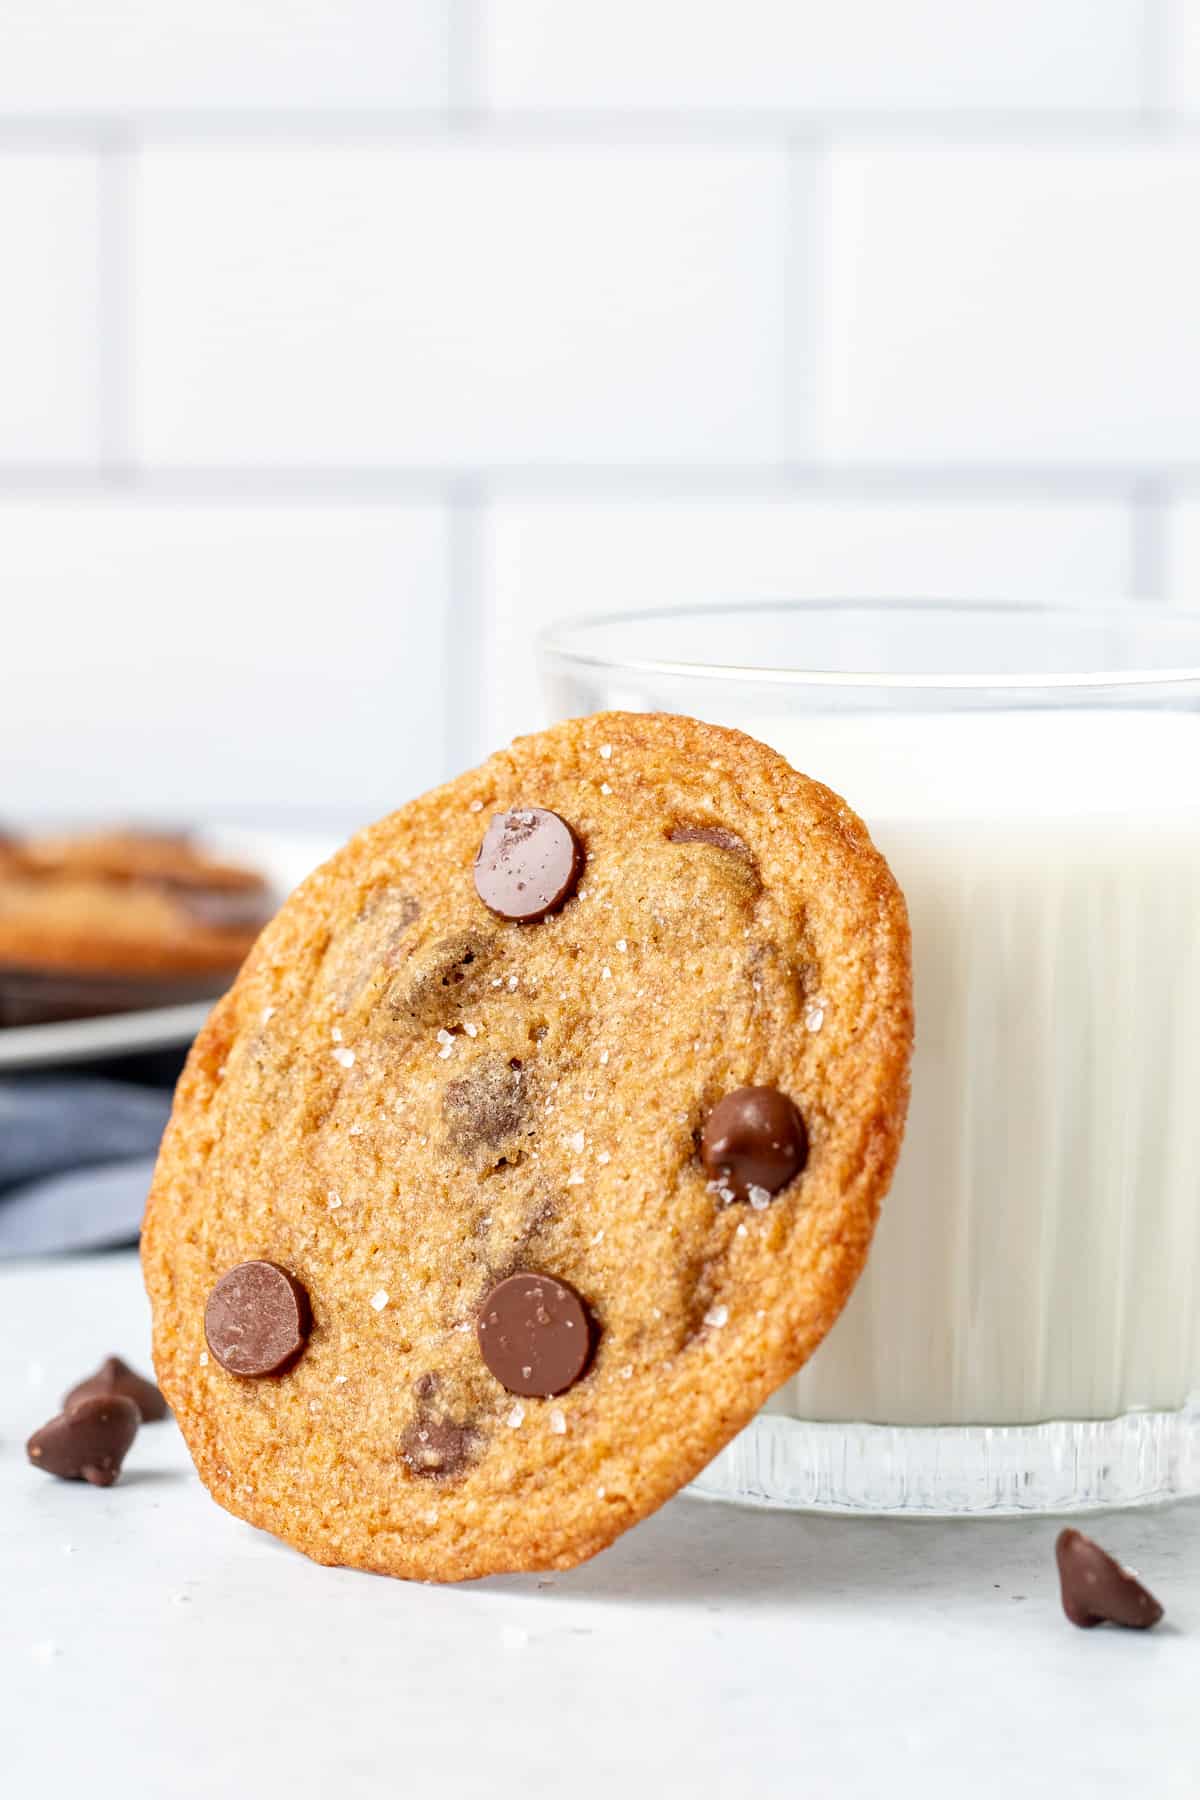 Crispy chocolate chip cookie leaning up against a glass of milk